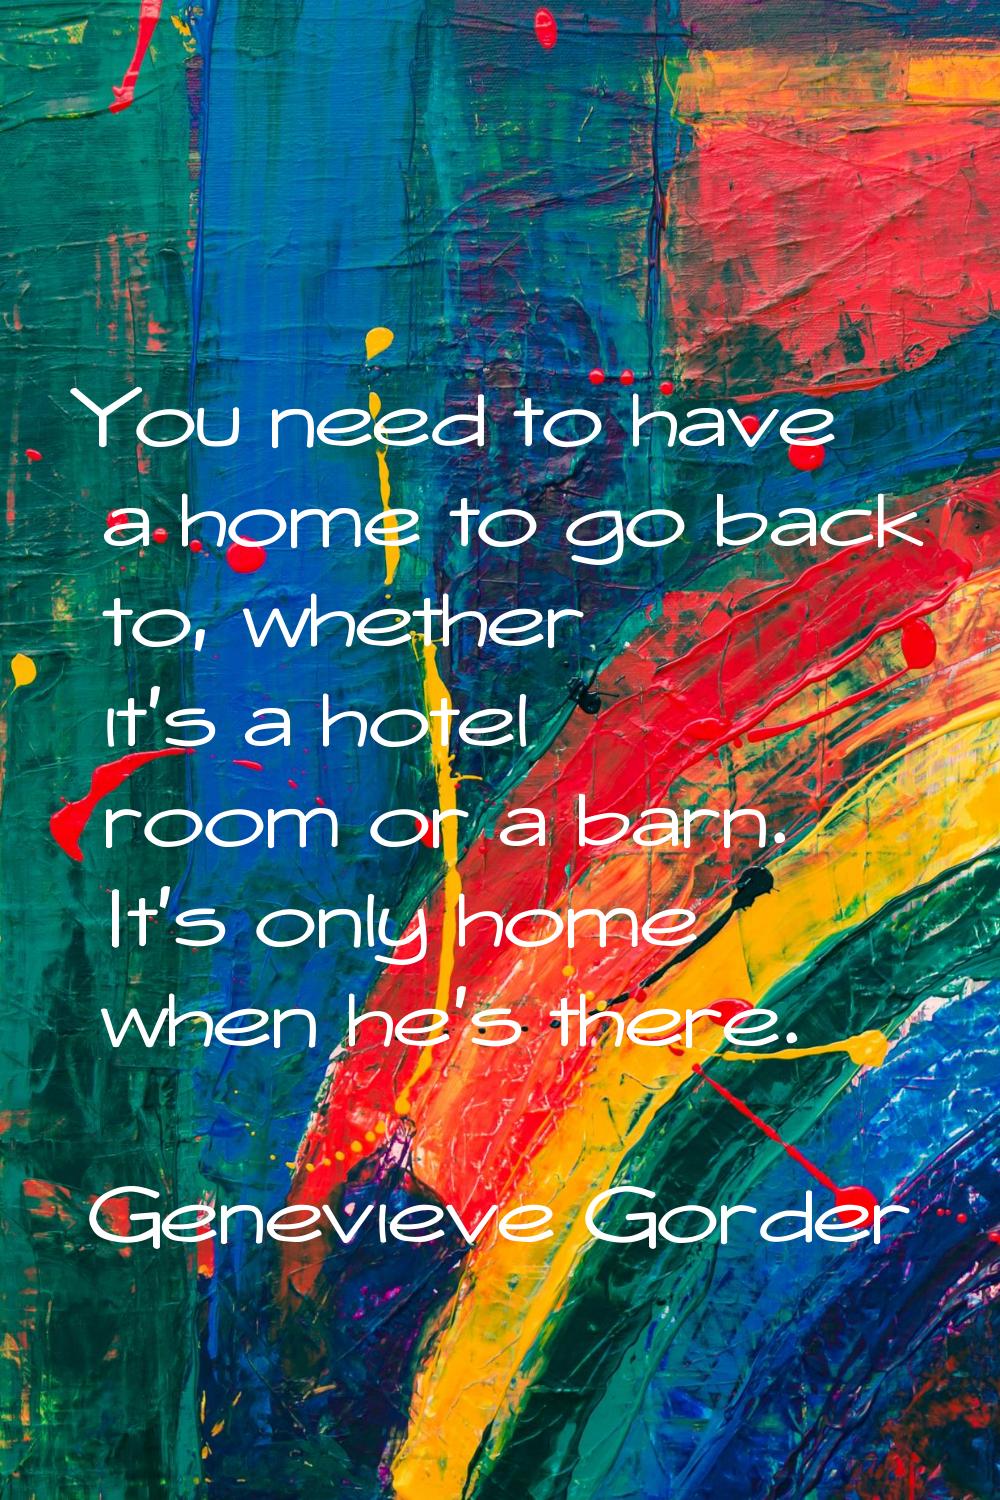 You need to have a home to go back to, whether it's a hotel room or a barn. It's only home when he'